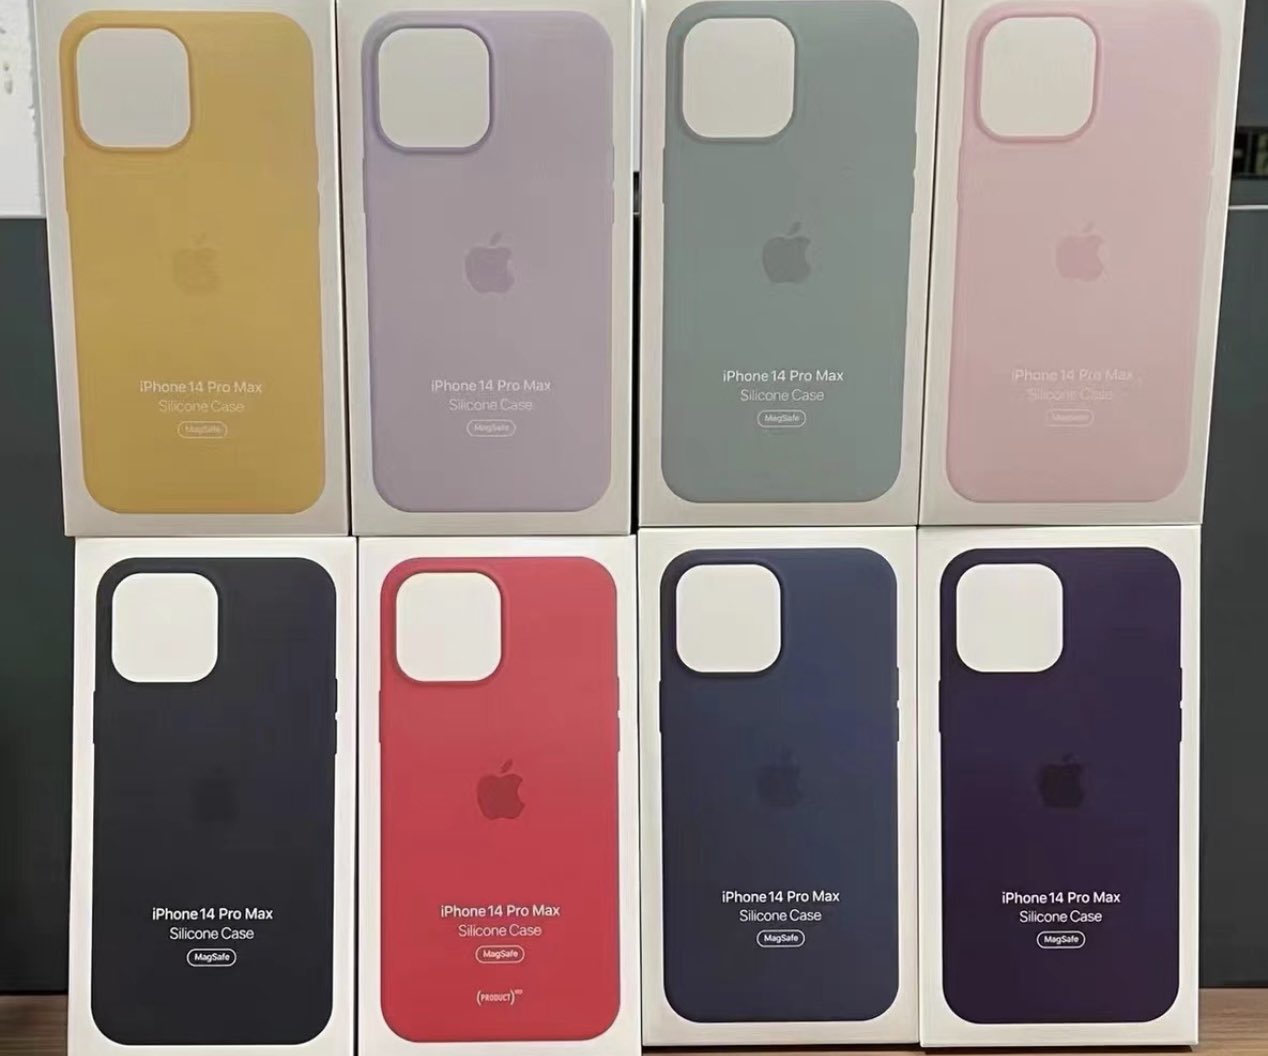 A photo of iPhone 14 Pro Max reproduction cases new in box, showing eight different colorways.